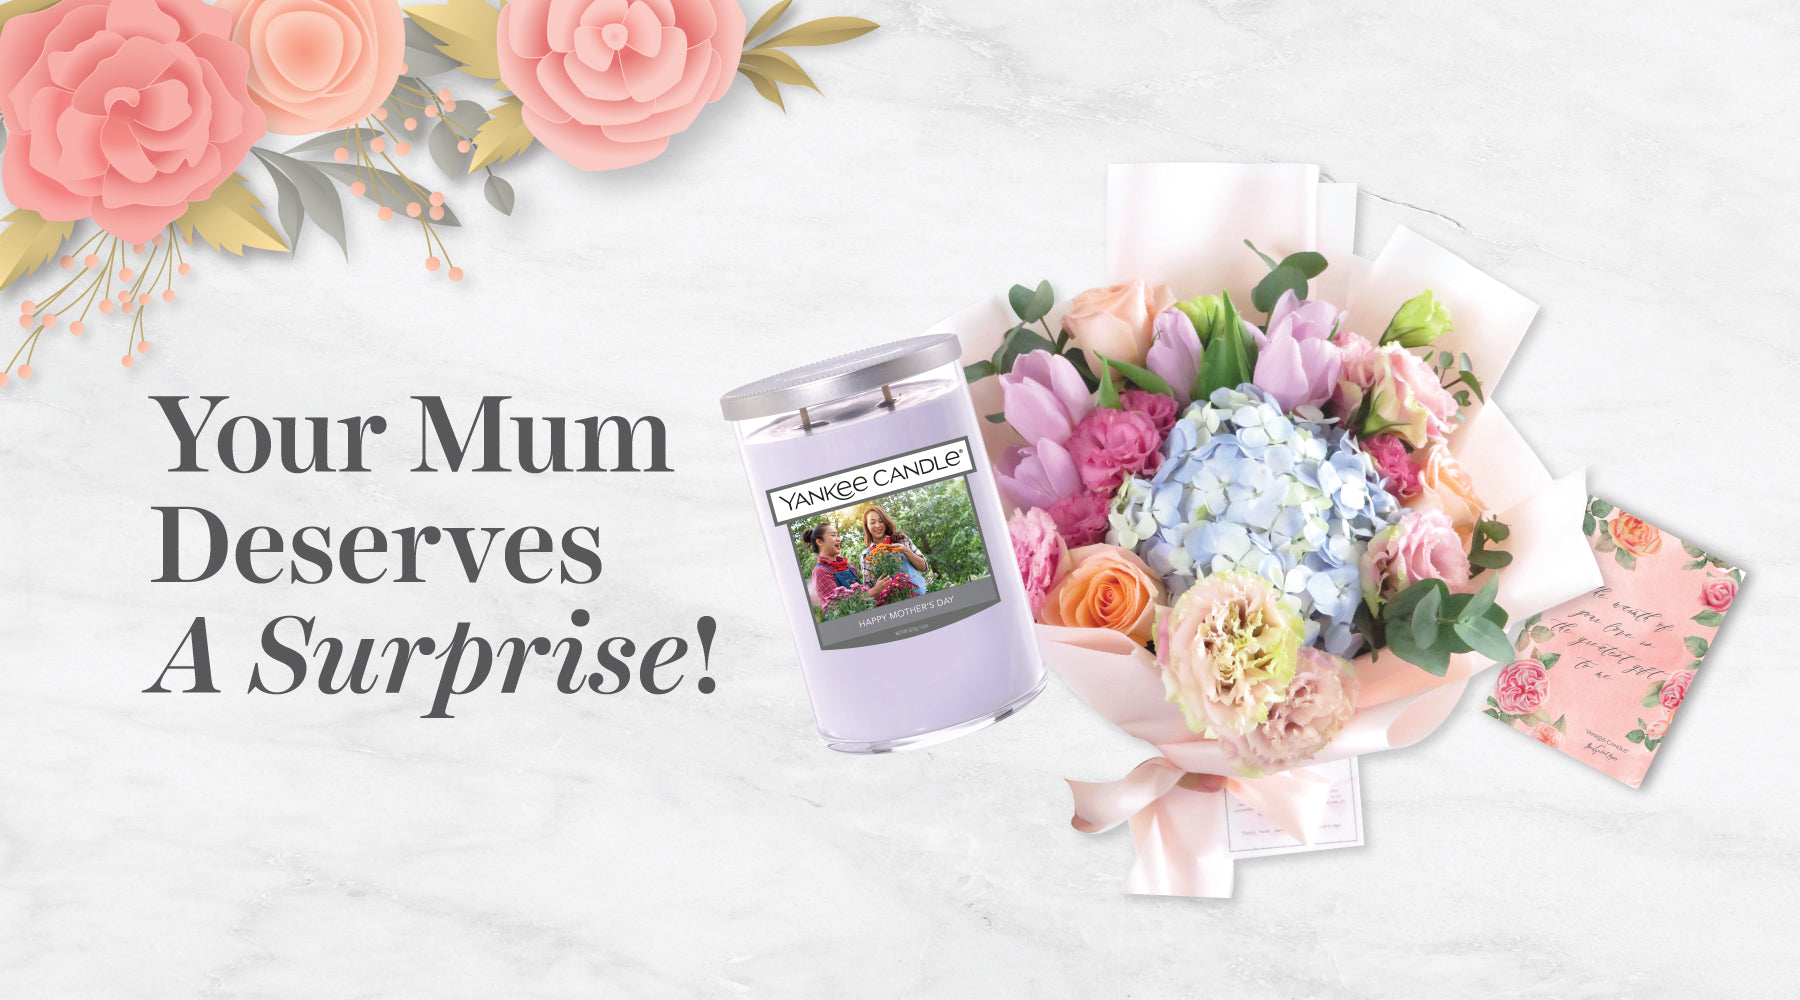 WIN a Surprise Bundle Gift this Mother's Day!